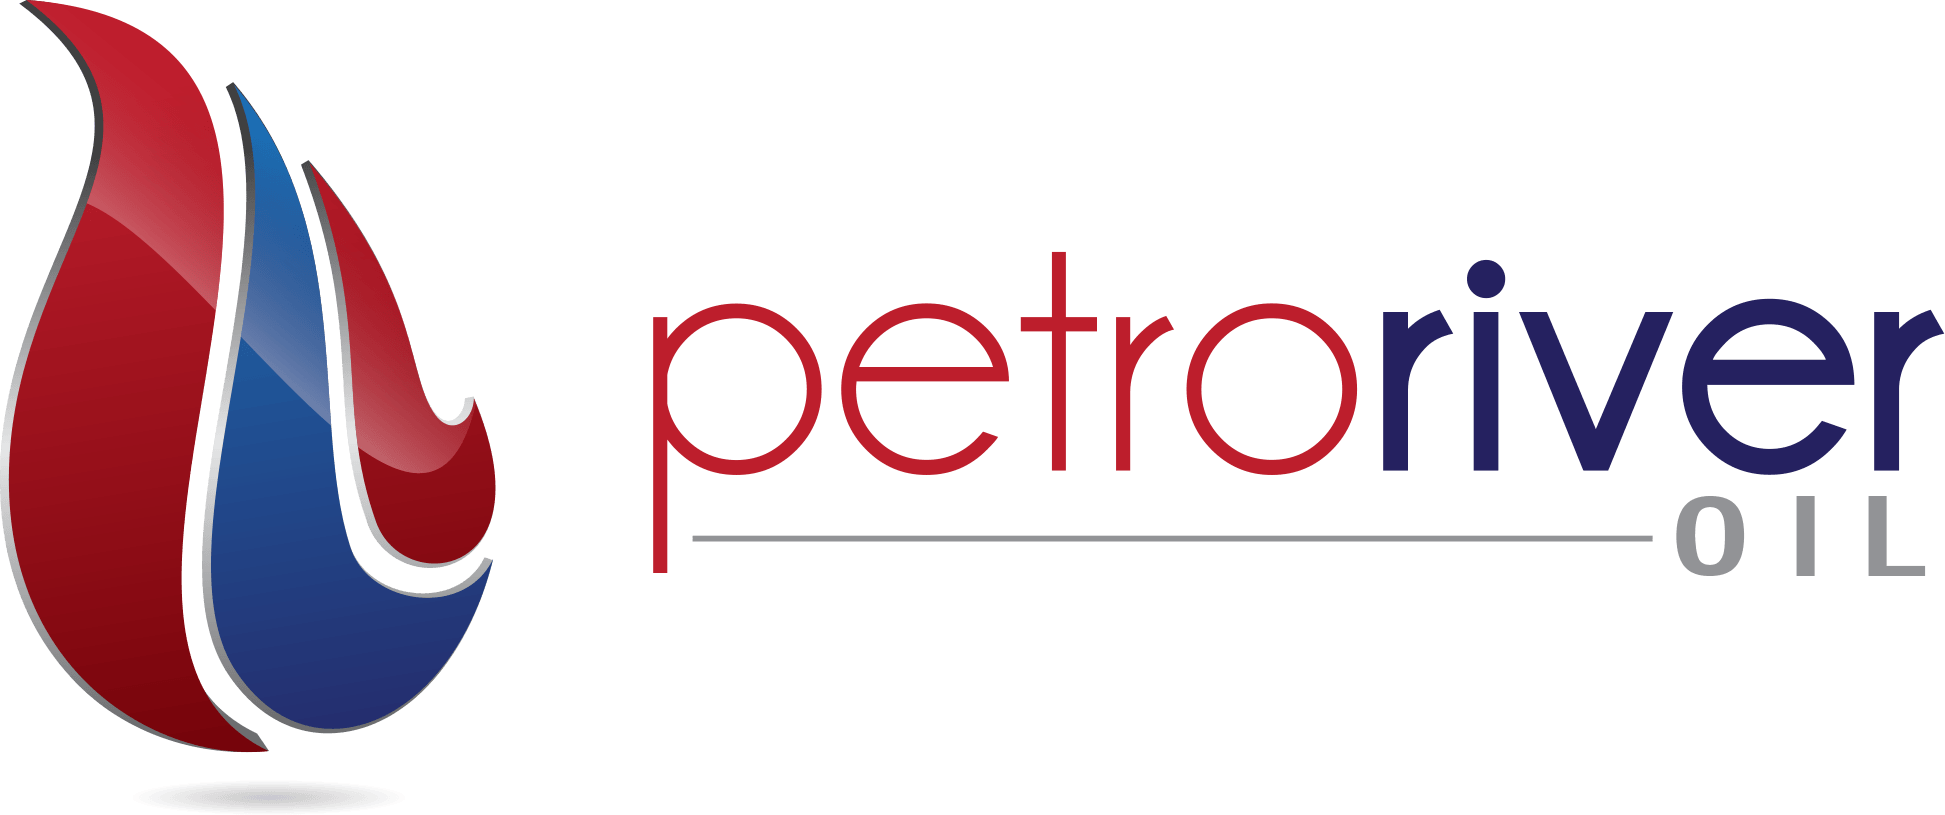 Oil and Gas Company Red Eagle Logo - Petro River Oil – Discovering The Undiscovered